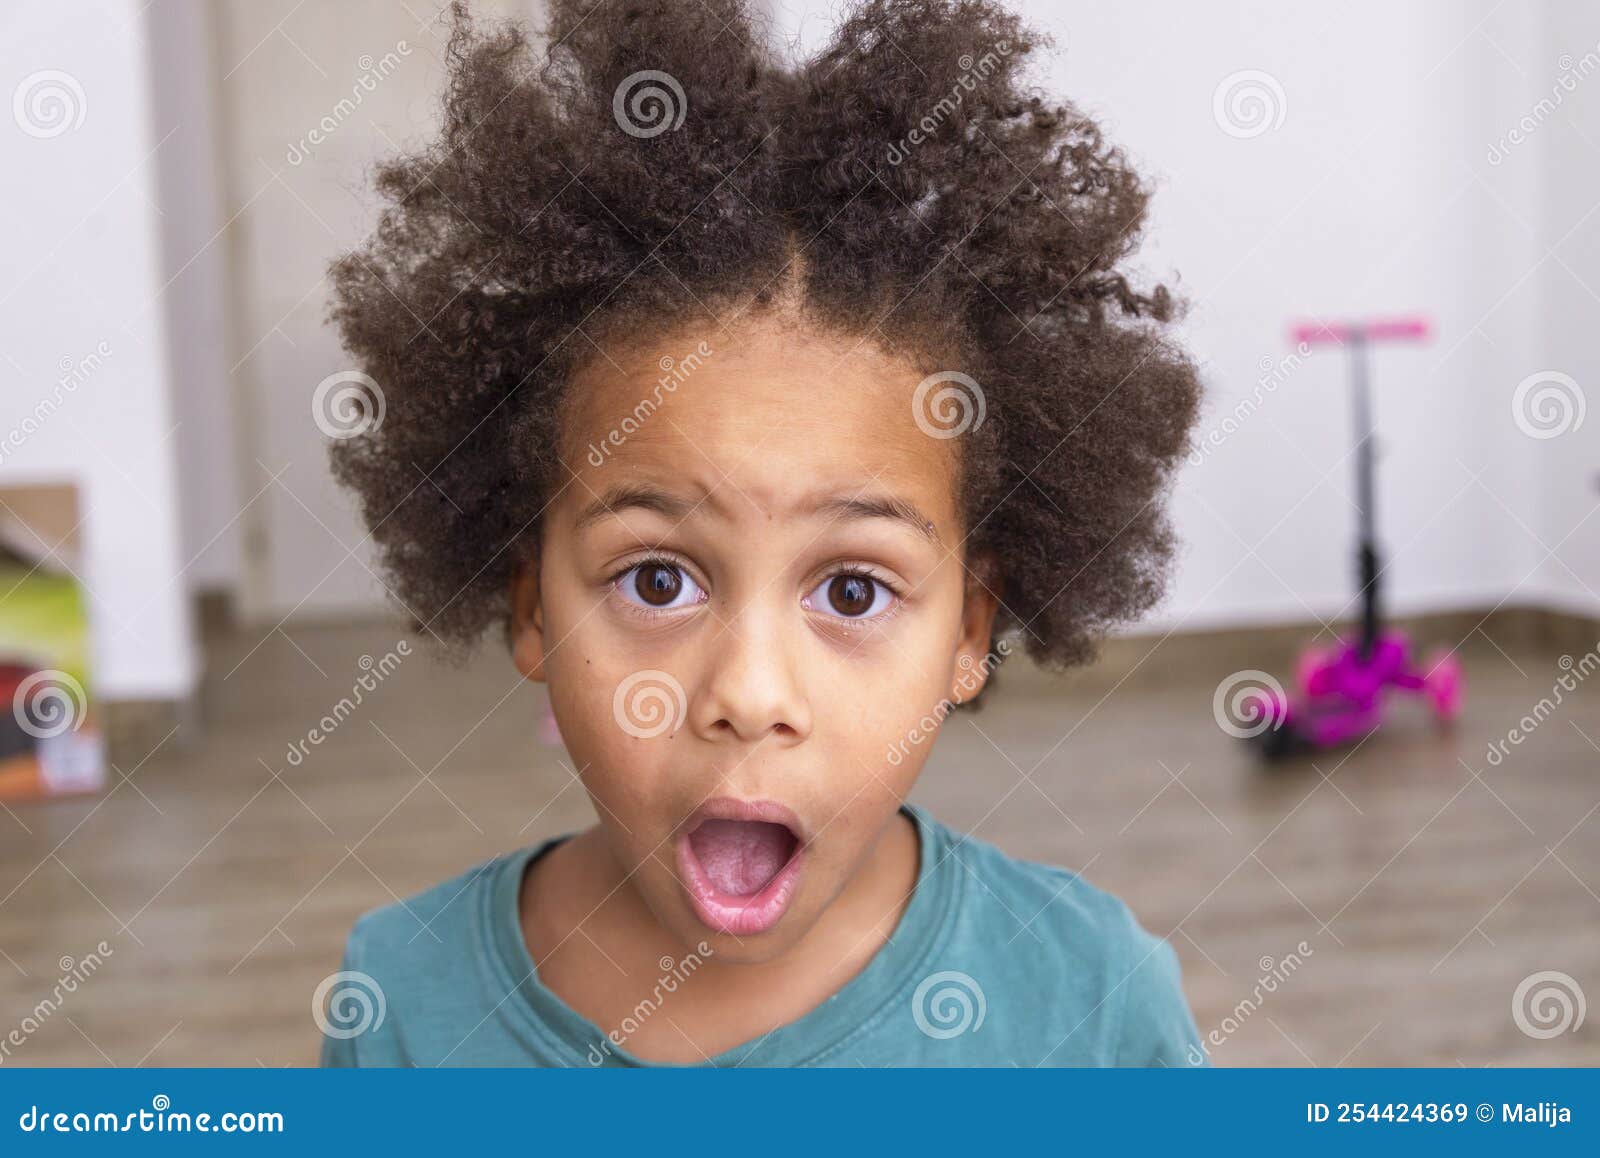 astonishment, shock, surprise, excitement and fascination on little  boy`s face.